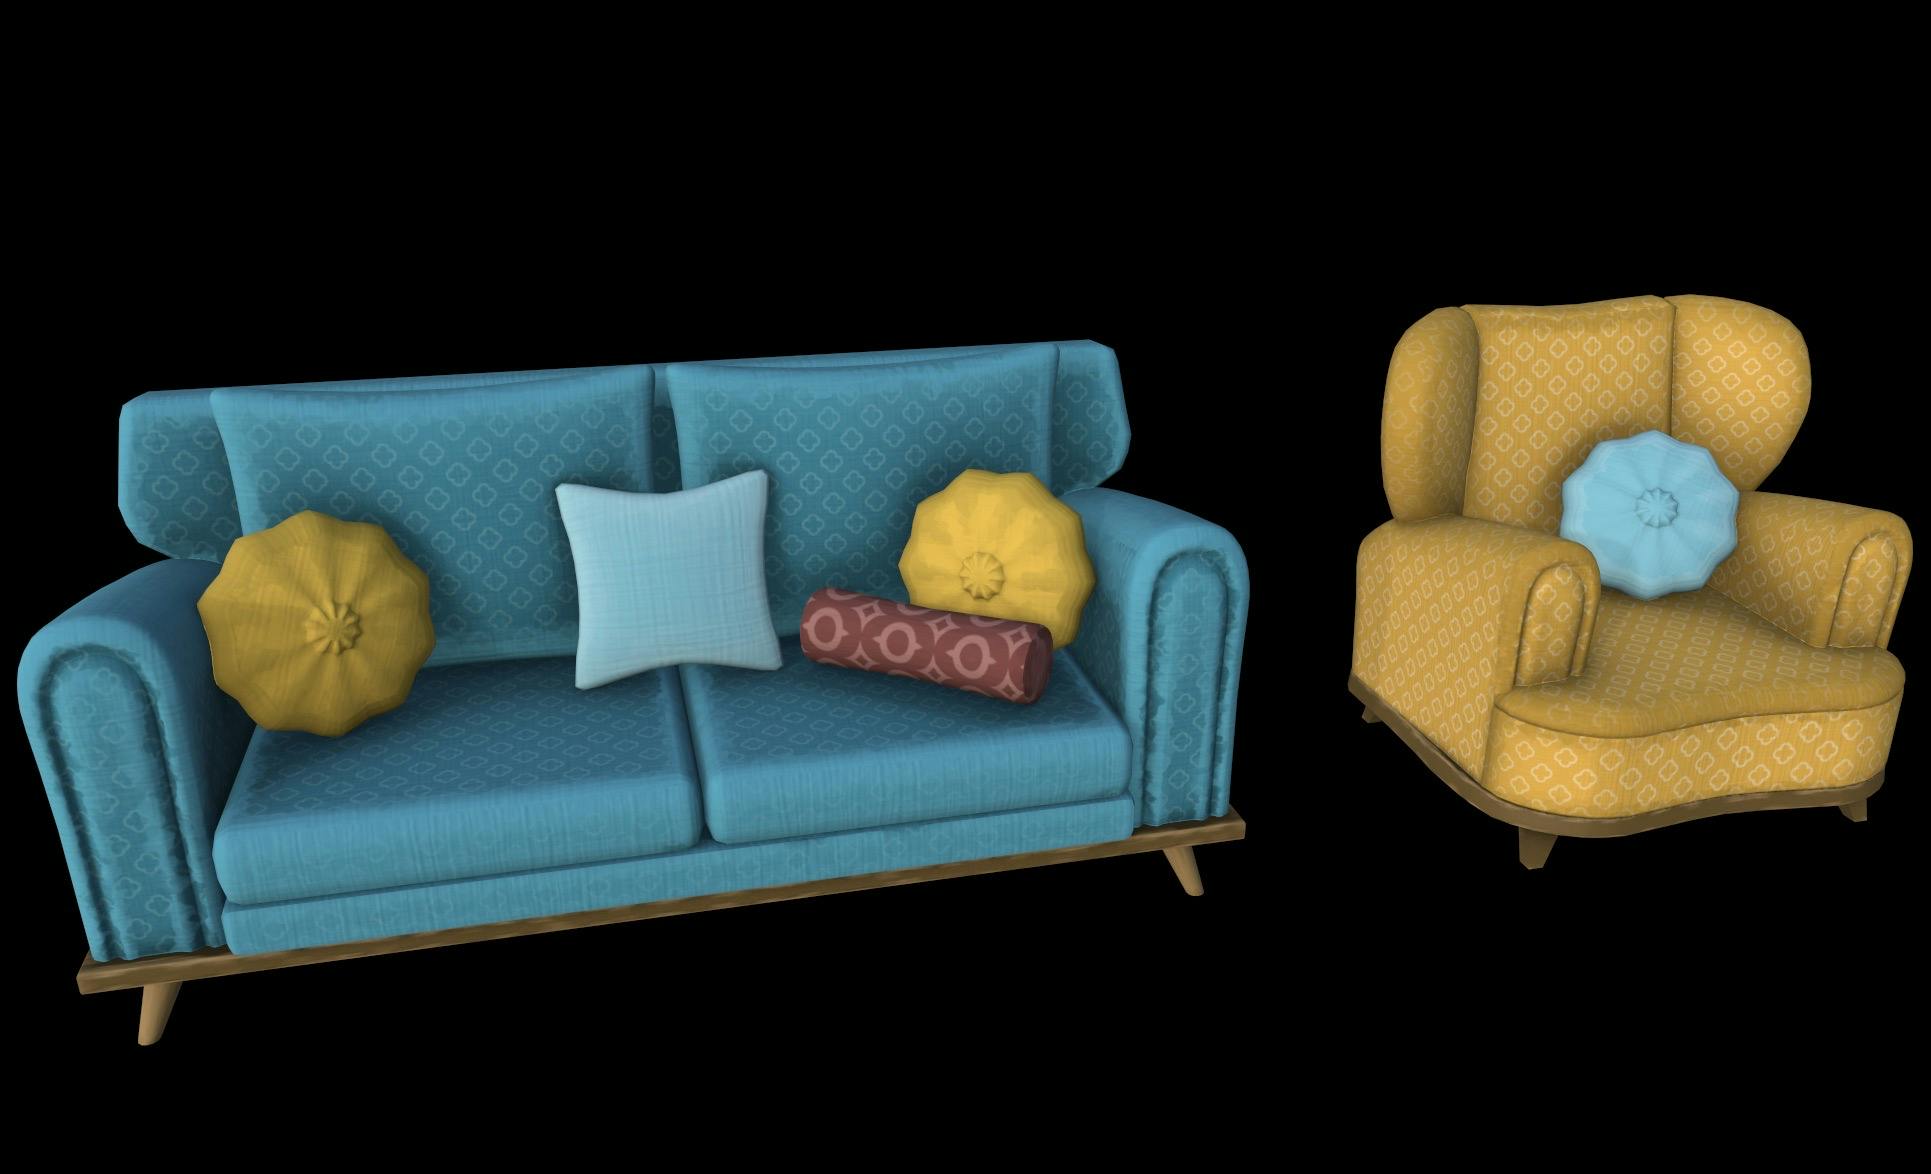 3D, textured models of a sofa and an armchair. The sofa is teal blue, with two yellow pinwheel cushions, a pale blue square cushion, and a patterned maroon bolster cushion. The armchair is yellow, with a pale blue pinwheel cushion. 